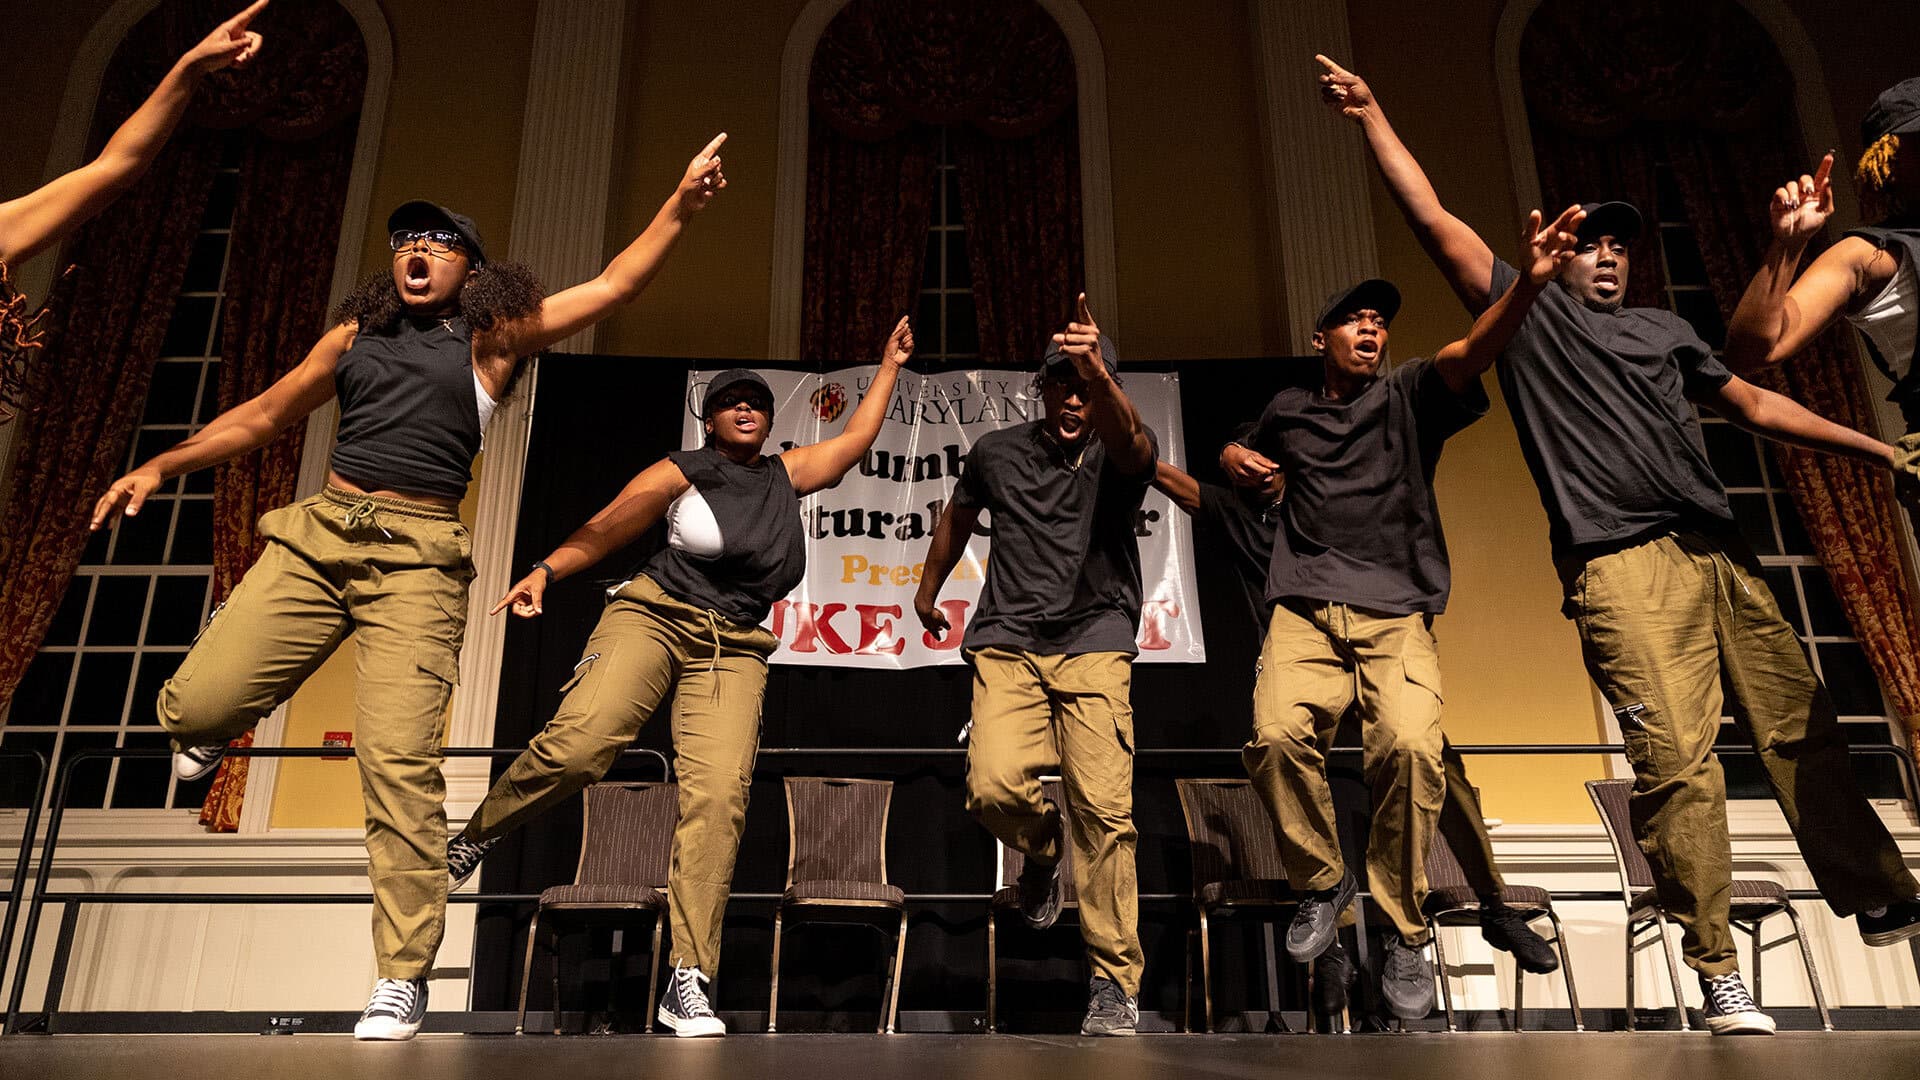 several members of a dance team dance on a stage